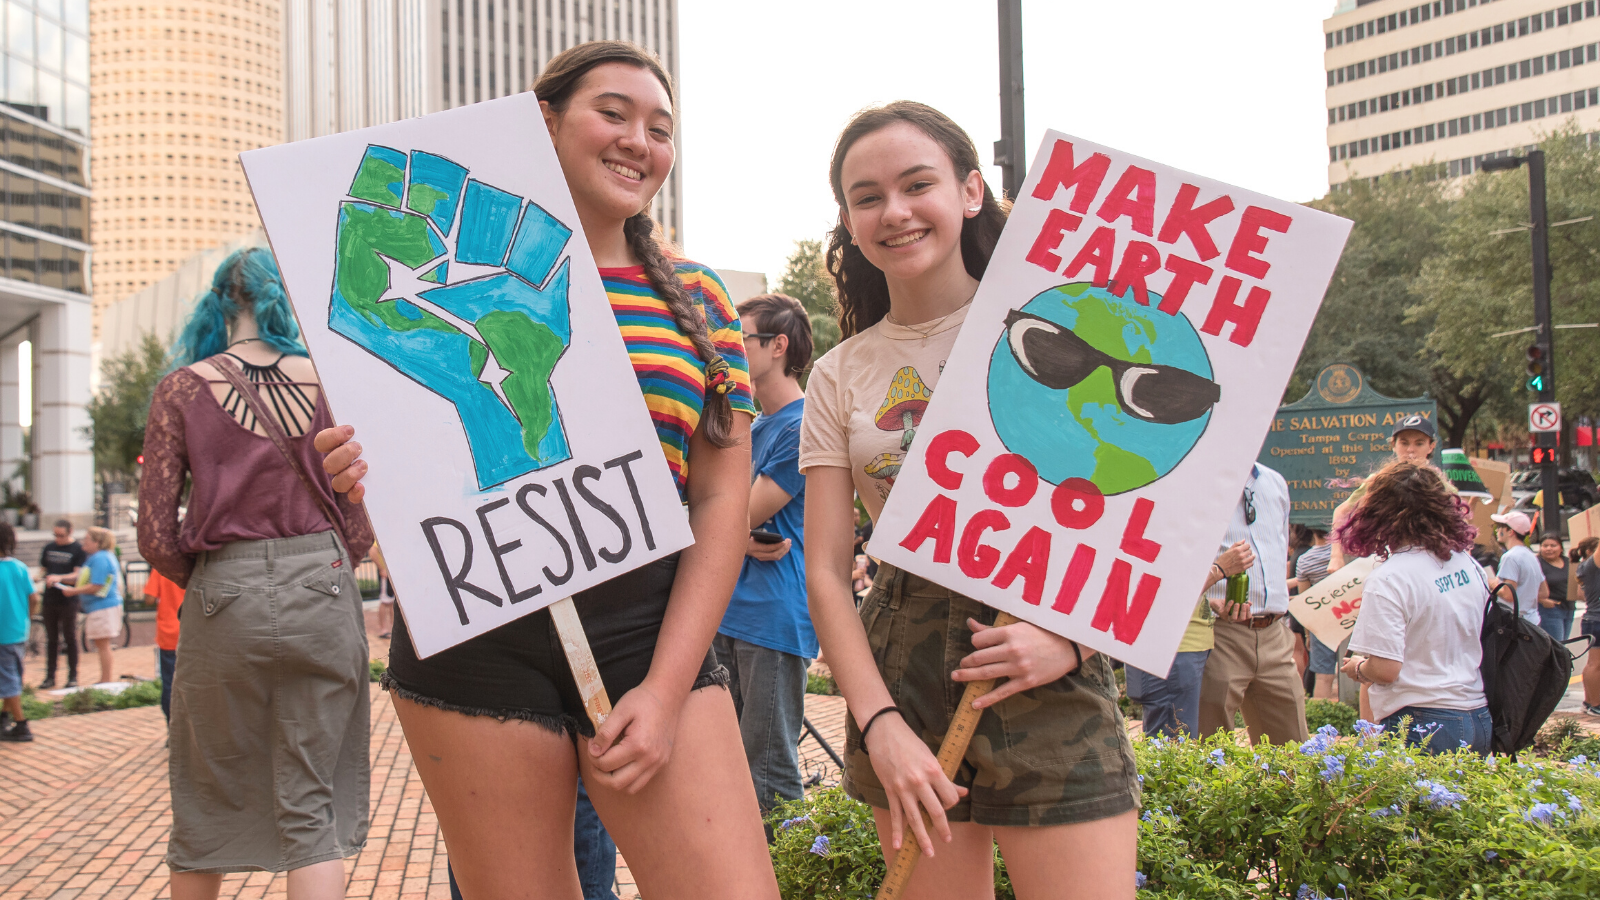 Two young women hold climate justice signs and smile